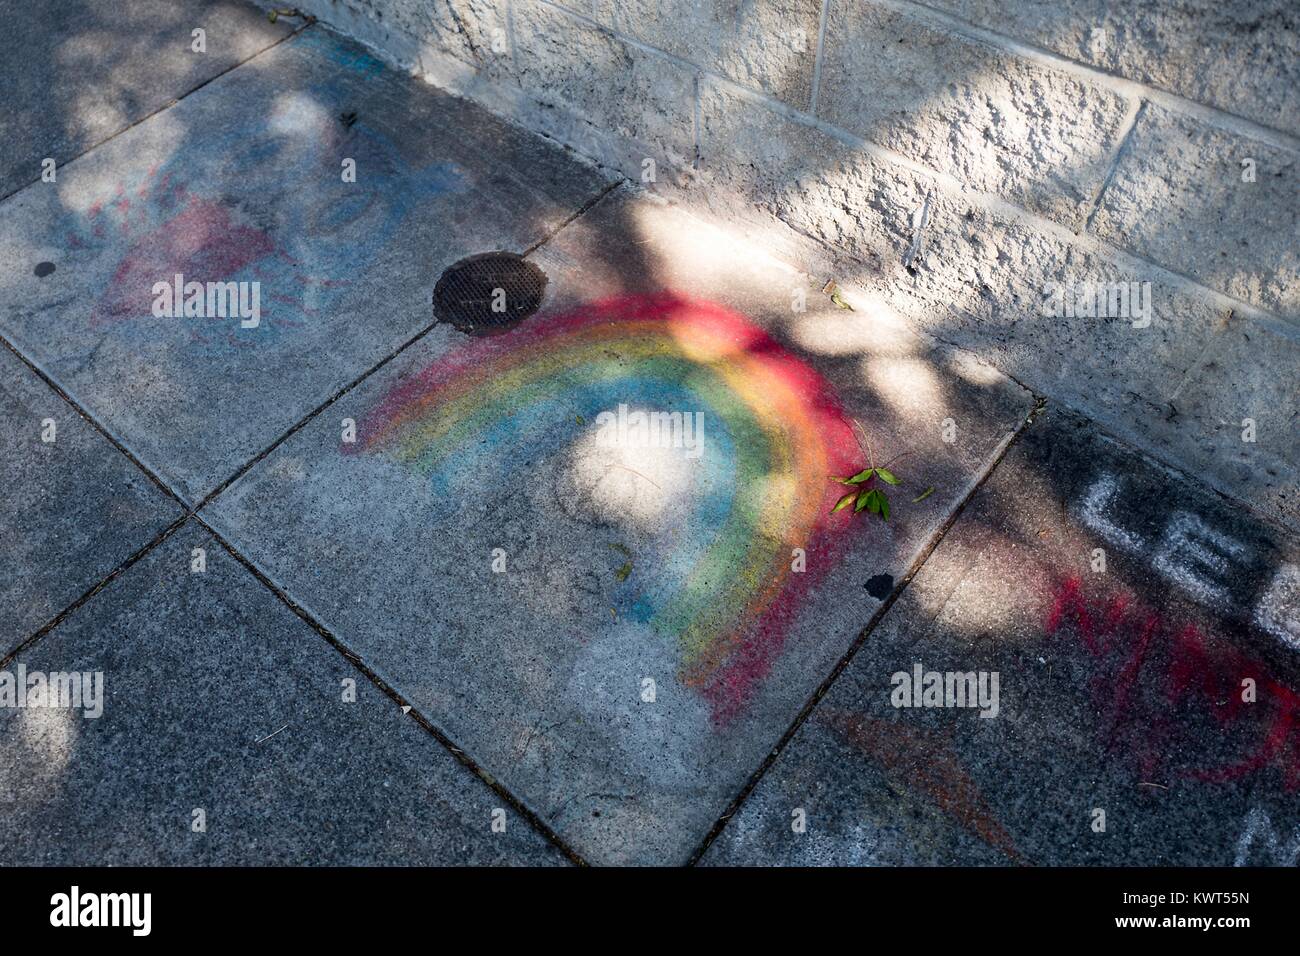 In the Gourmet Ghetto (North Shattuck) neighborhood of Berkeley, California, someone has used sidewalk chalk to draw a rainbow on the sidewalk, a symbol both of the hippie movement and of LGBT rights, October 6, 2017. () Stock Photo